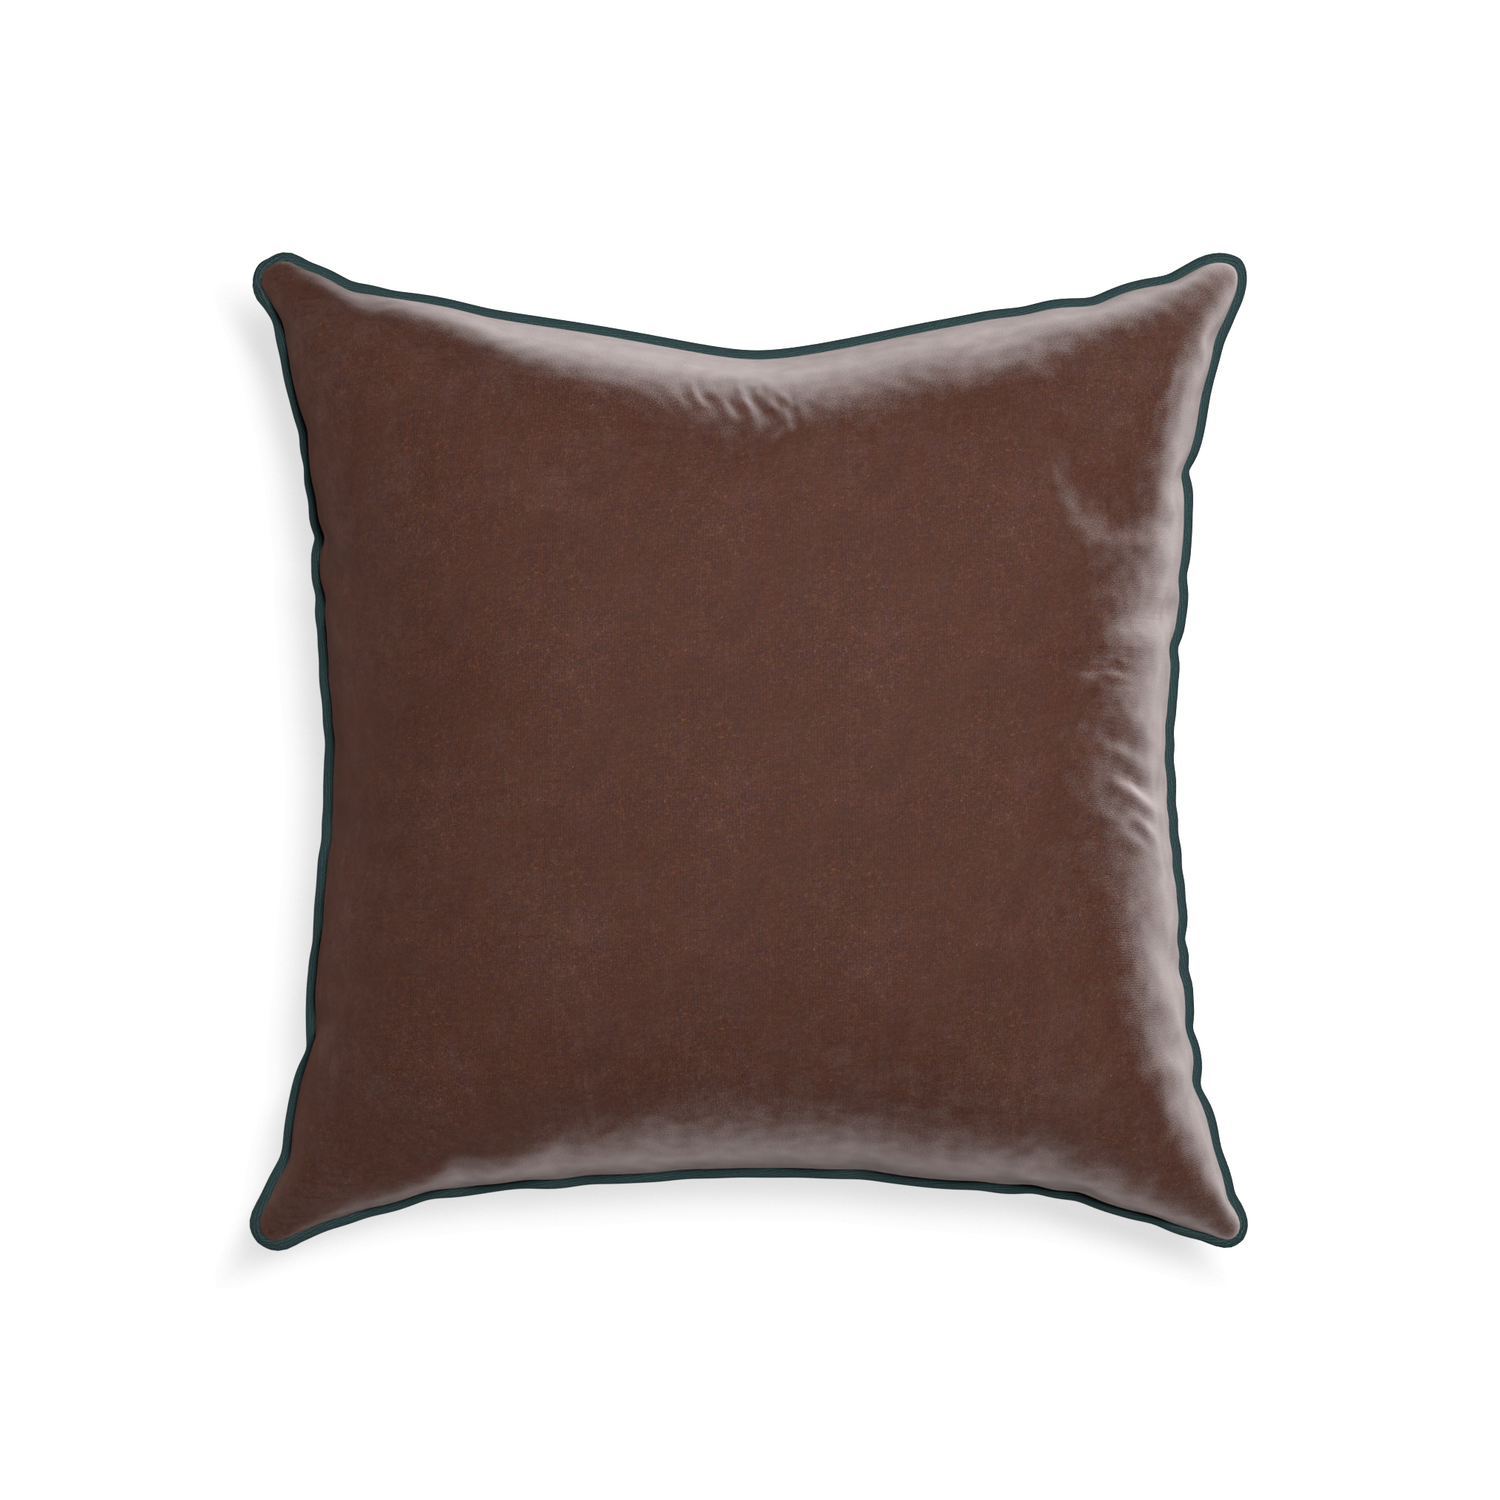 22-square walnut velvet custom brownpillow with p piping on white background